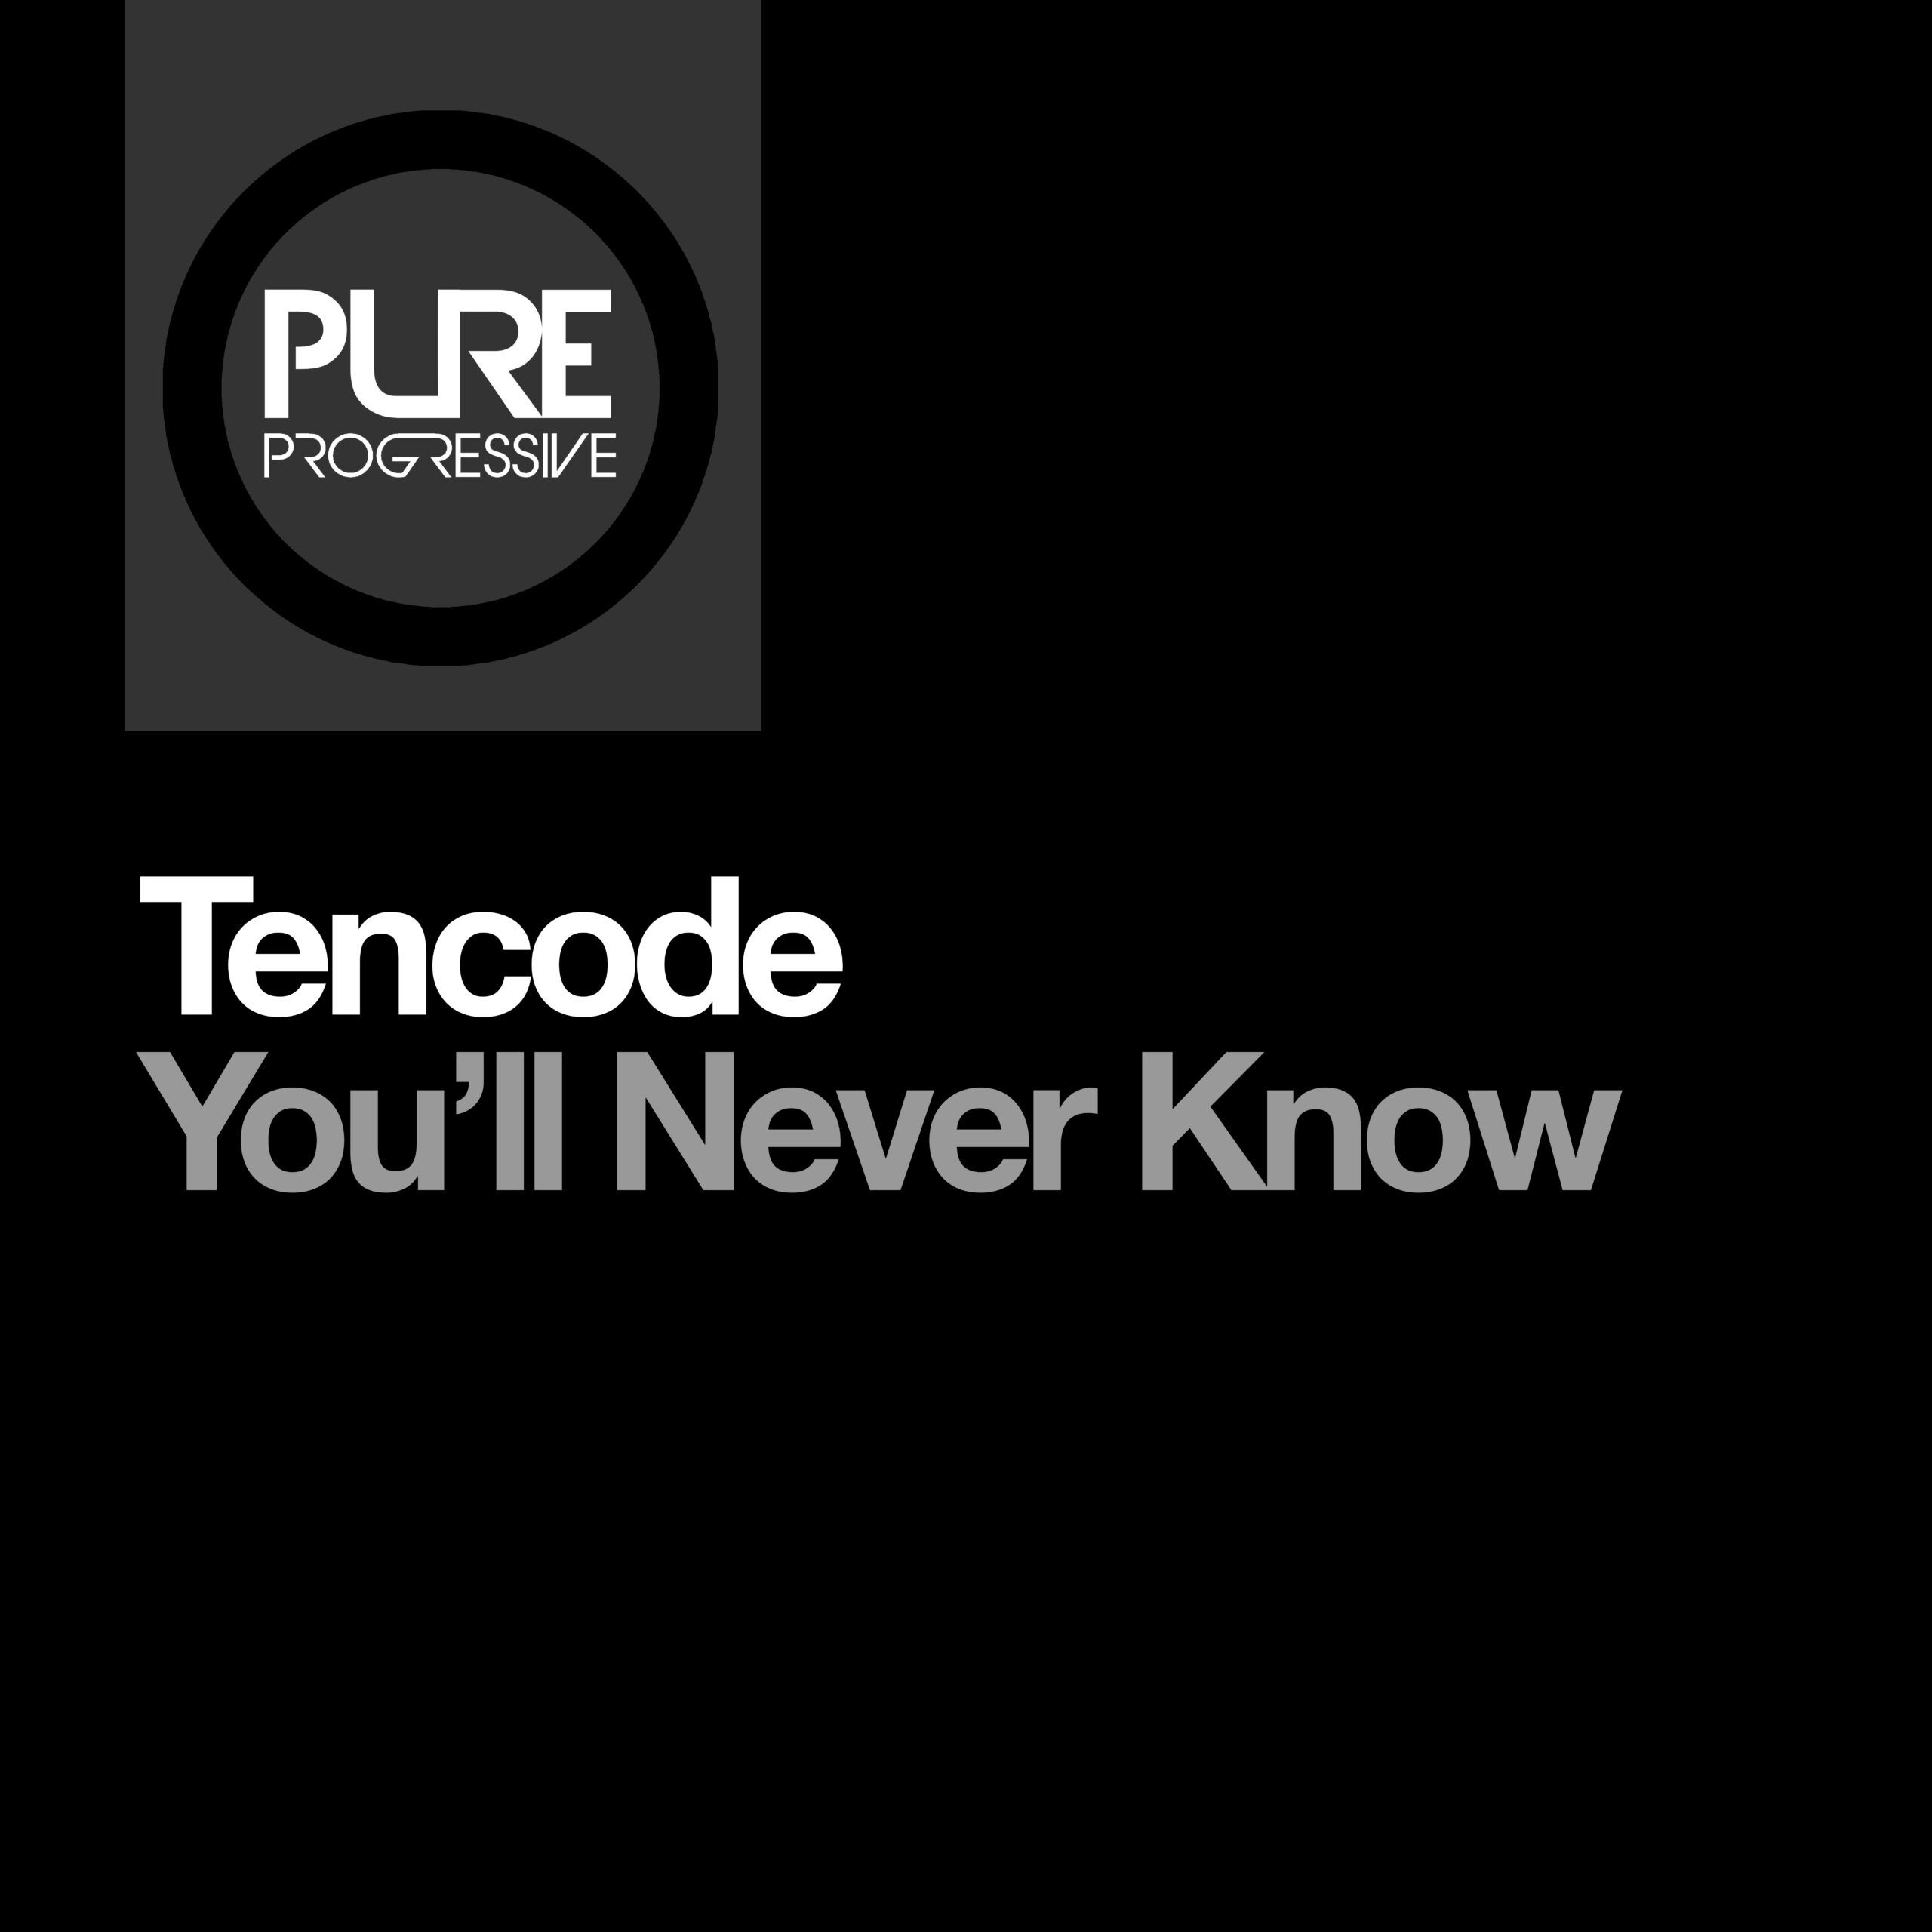 ptp038_tencode_-_you_ll_never_know.jpg